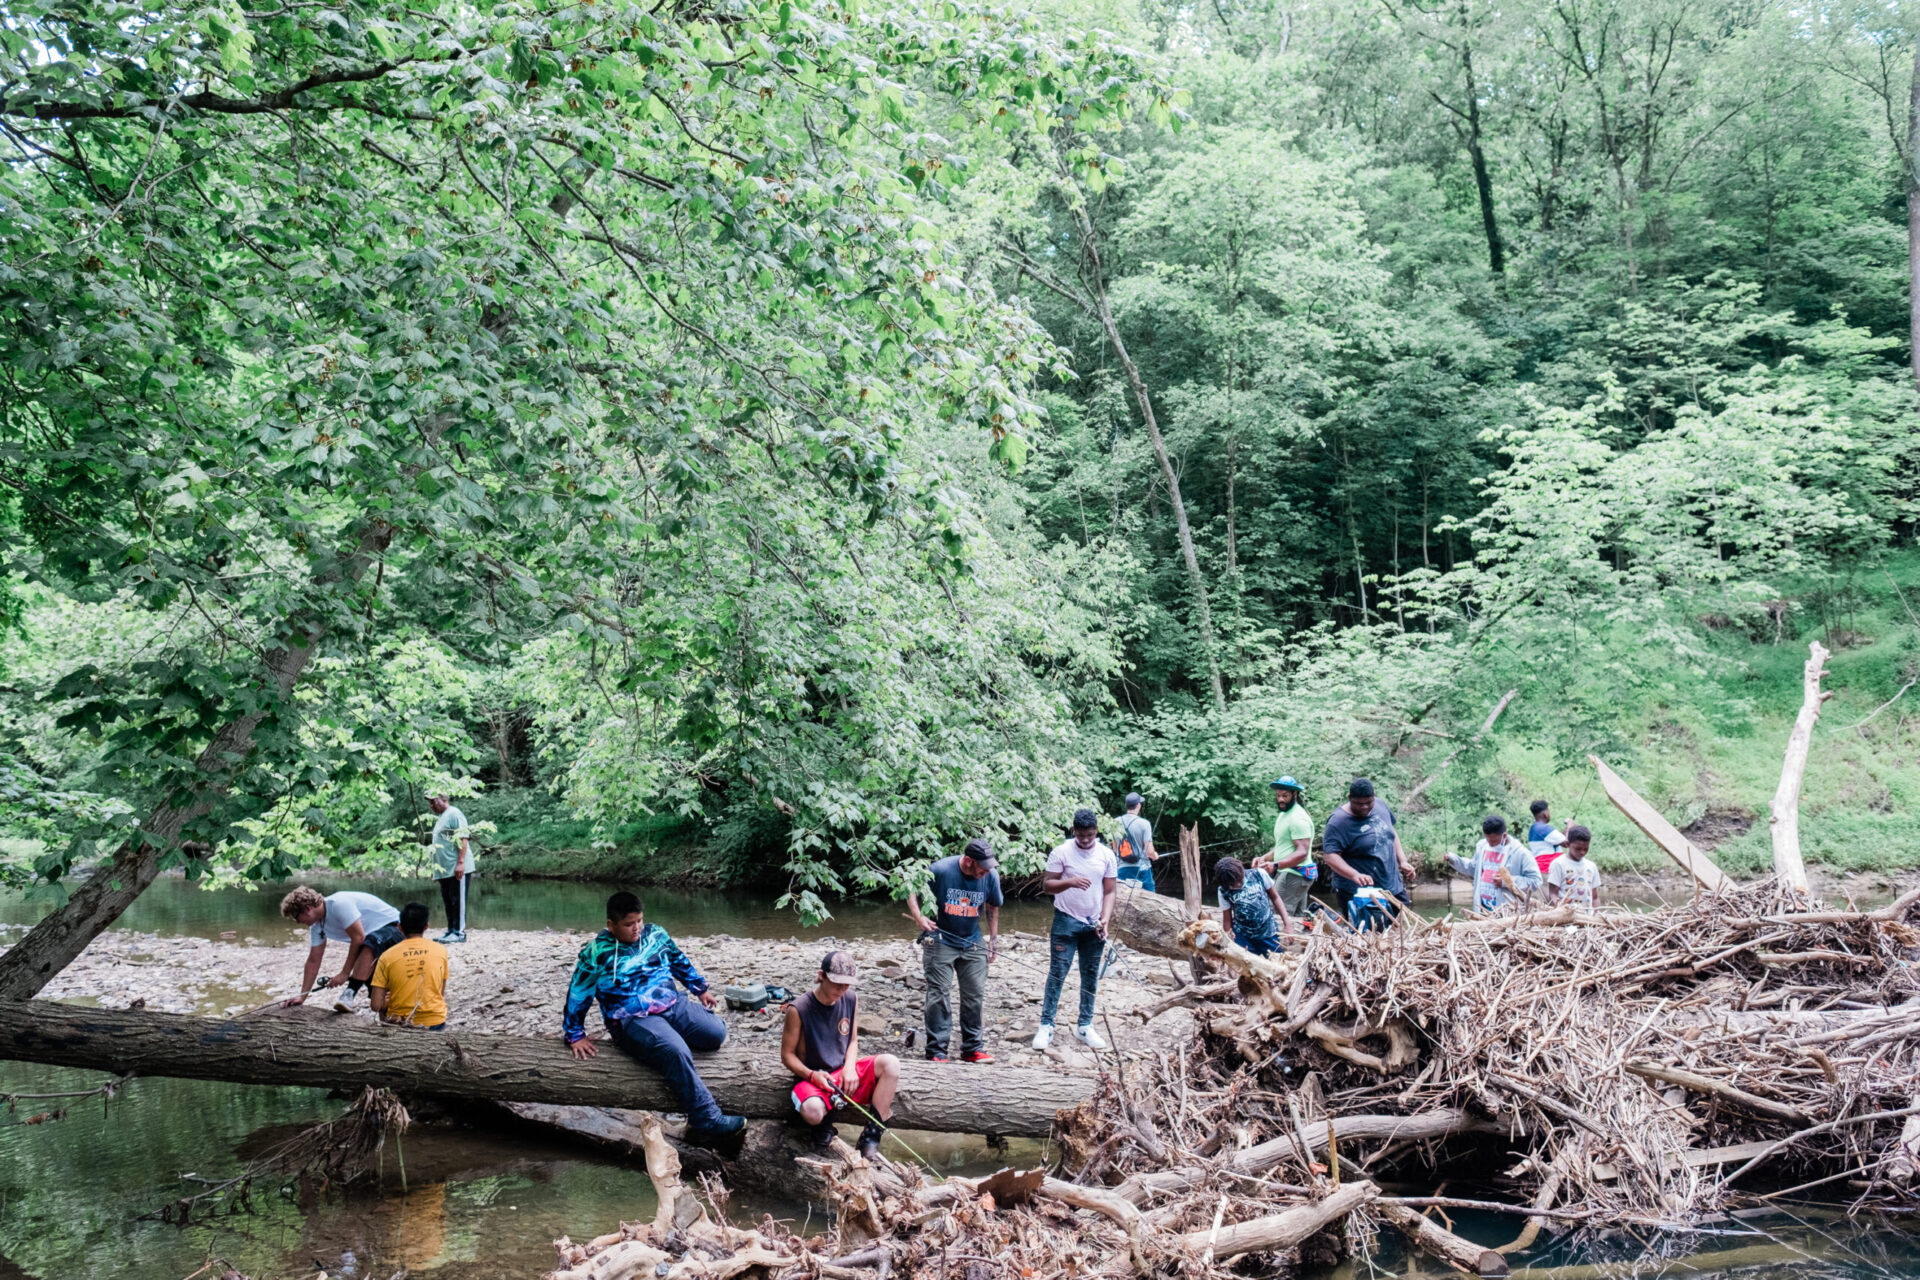 High school students from Clairton School District explore a creek during a summer learning program.